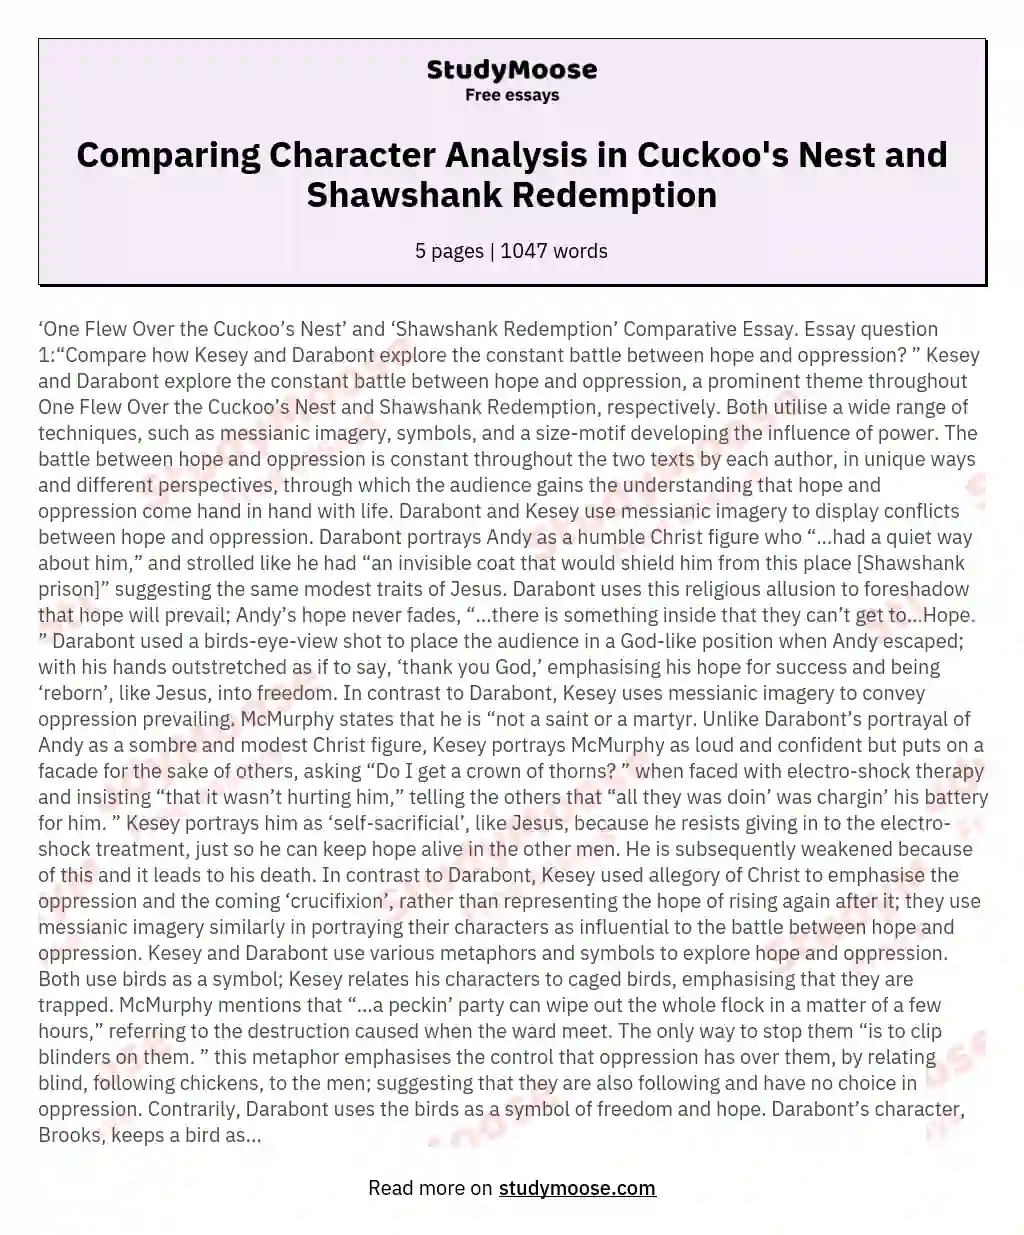 Character Analysis and Comparison: One Flew Over the Cuckoo's Nest' and Shawshank Redemption